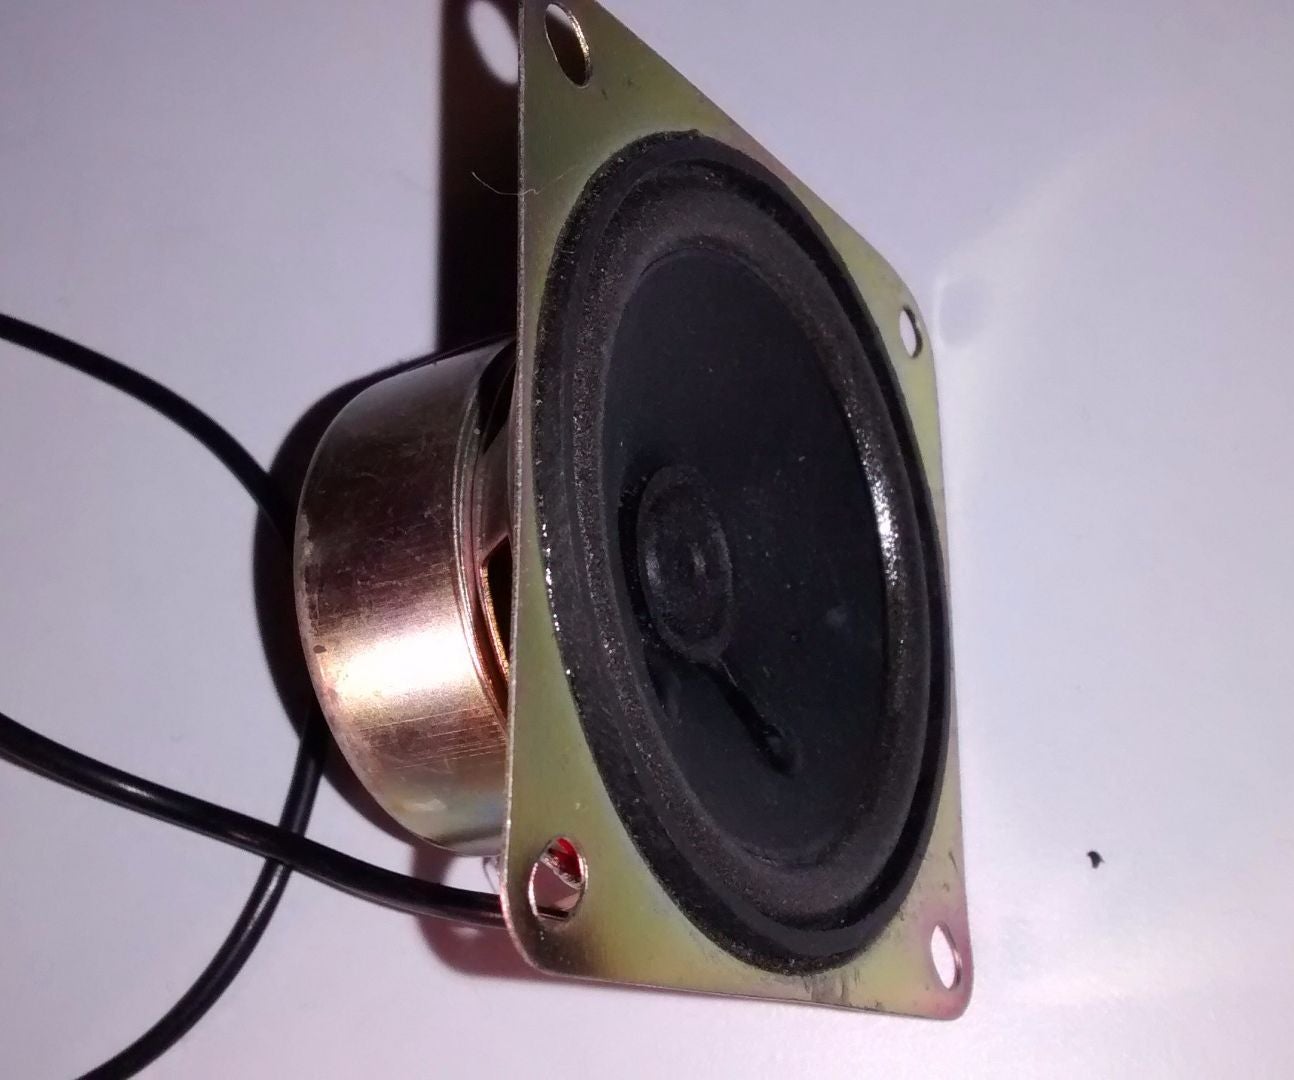 How to Salvage a Magnet From a Speaker